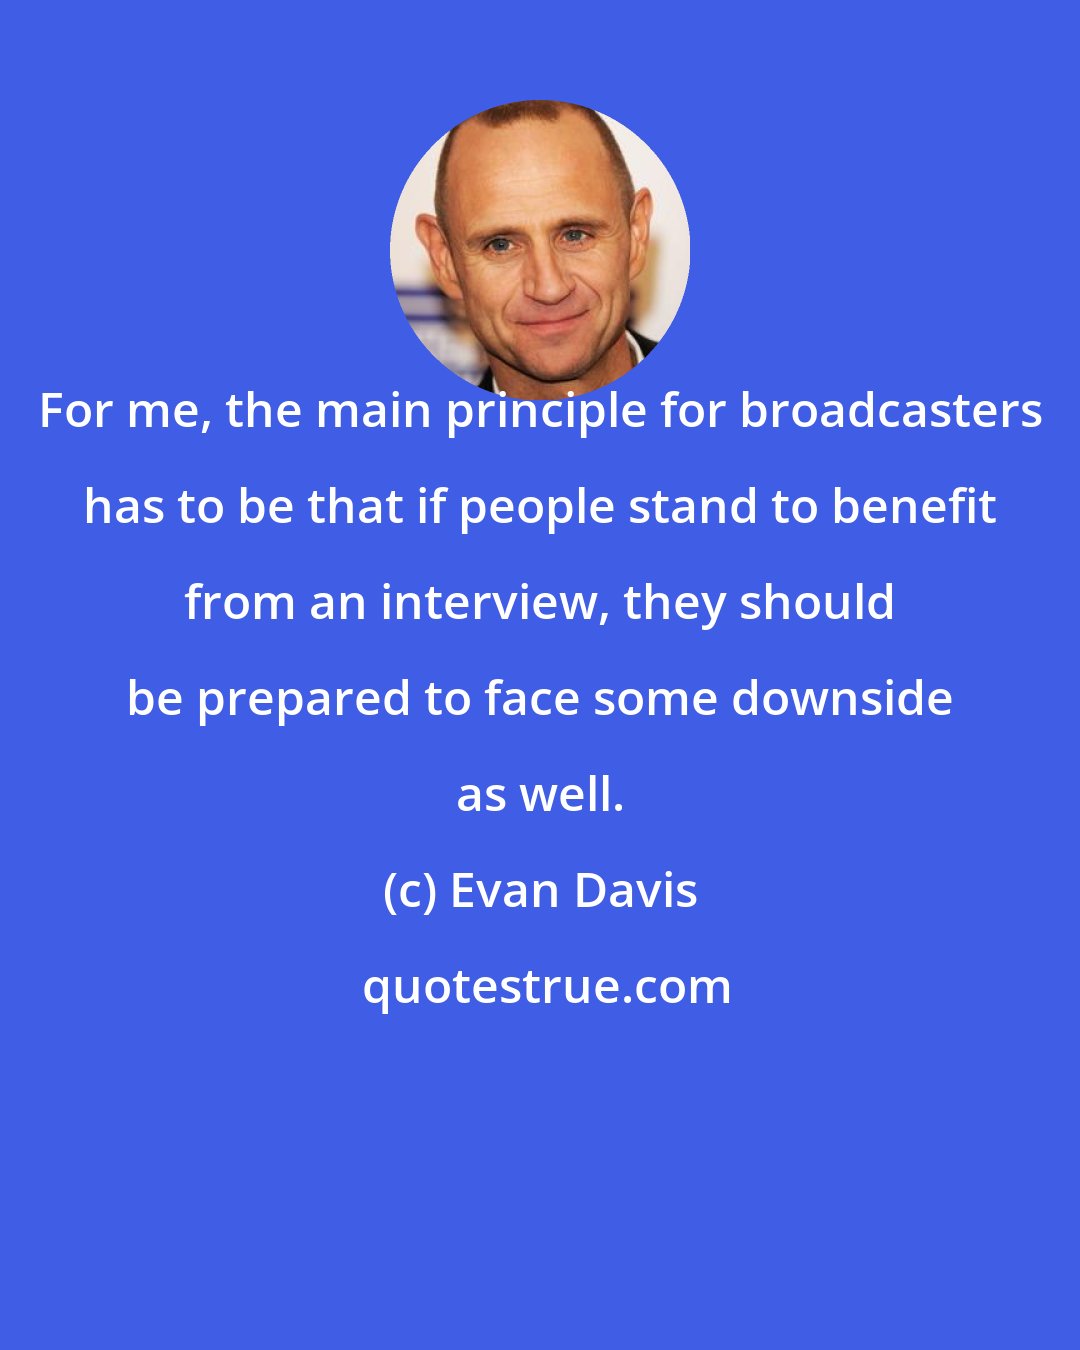 Evan Davis: For me, the main principle for broadcasters has to be that if people stand to benefit from an interview, they should be prepared to face some downside as well.